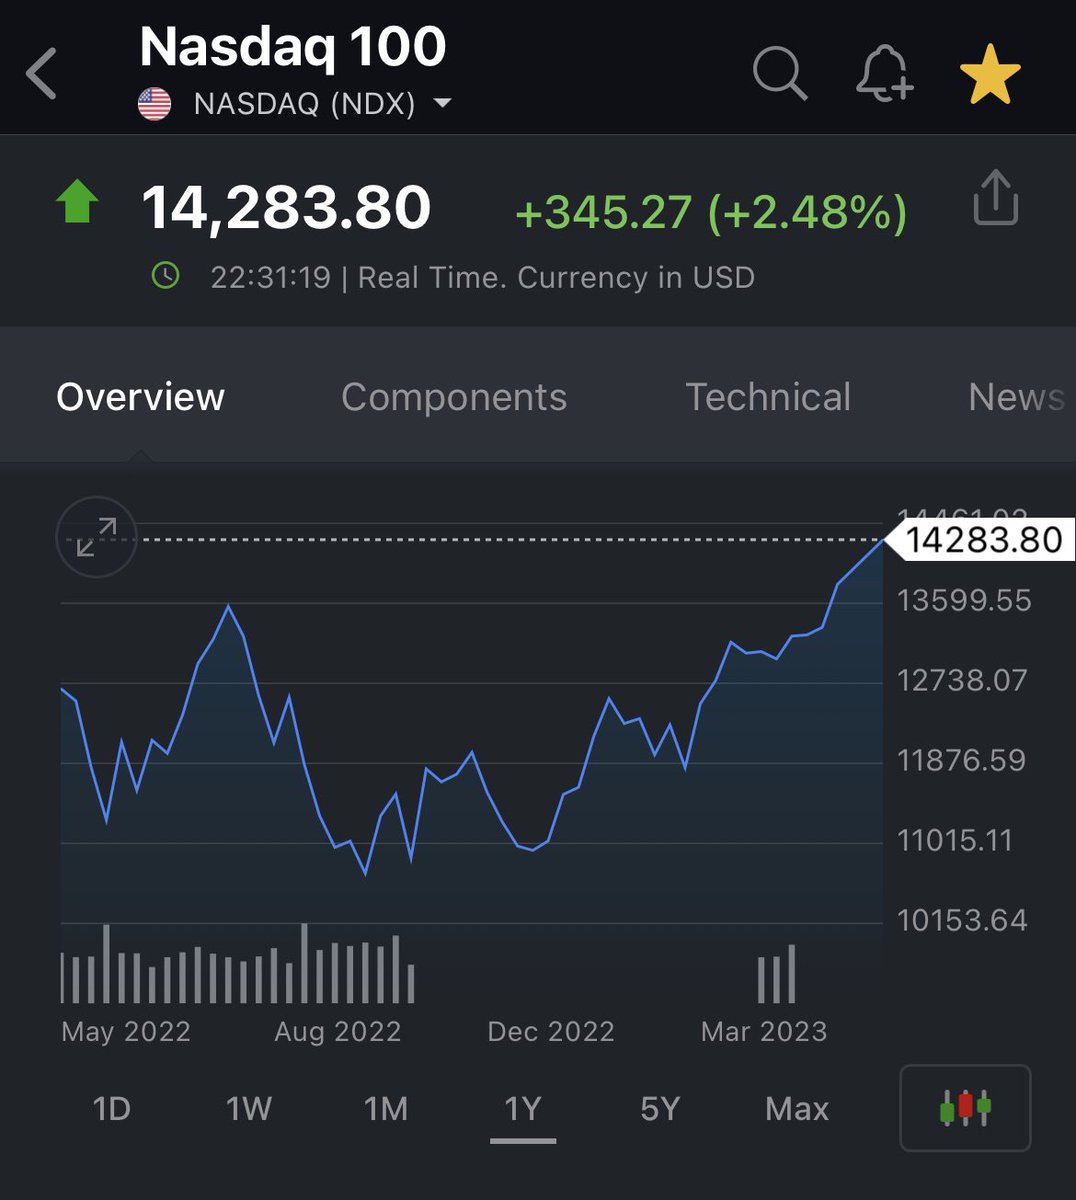 Nasdaq 100 is on fire 🔥

From its 52 week bottom the index has shot up by around 37% 🚀

Had recommended to invest in the US 🇺🇸 markets the entire 2022, even uptill early jan 2023

Jisne invest kiya unka dhamaal hai, jisne nahi unka babaal hai 😜